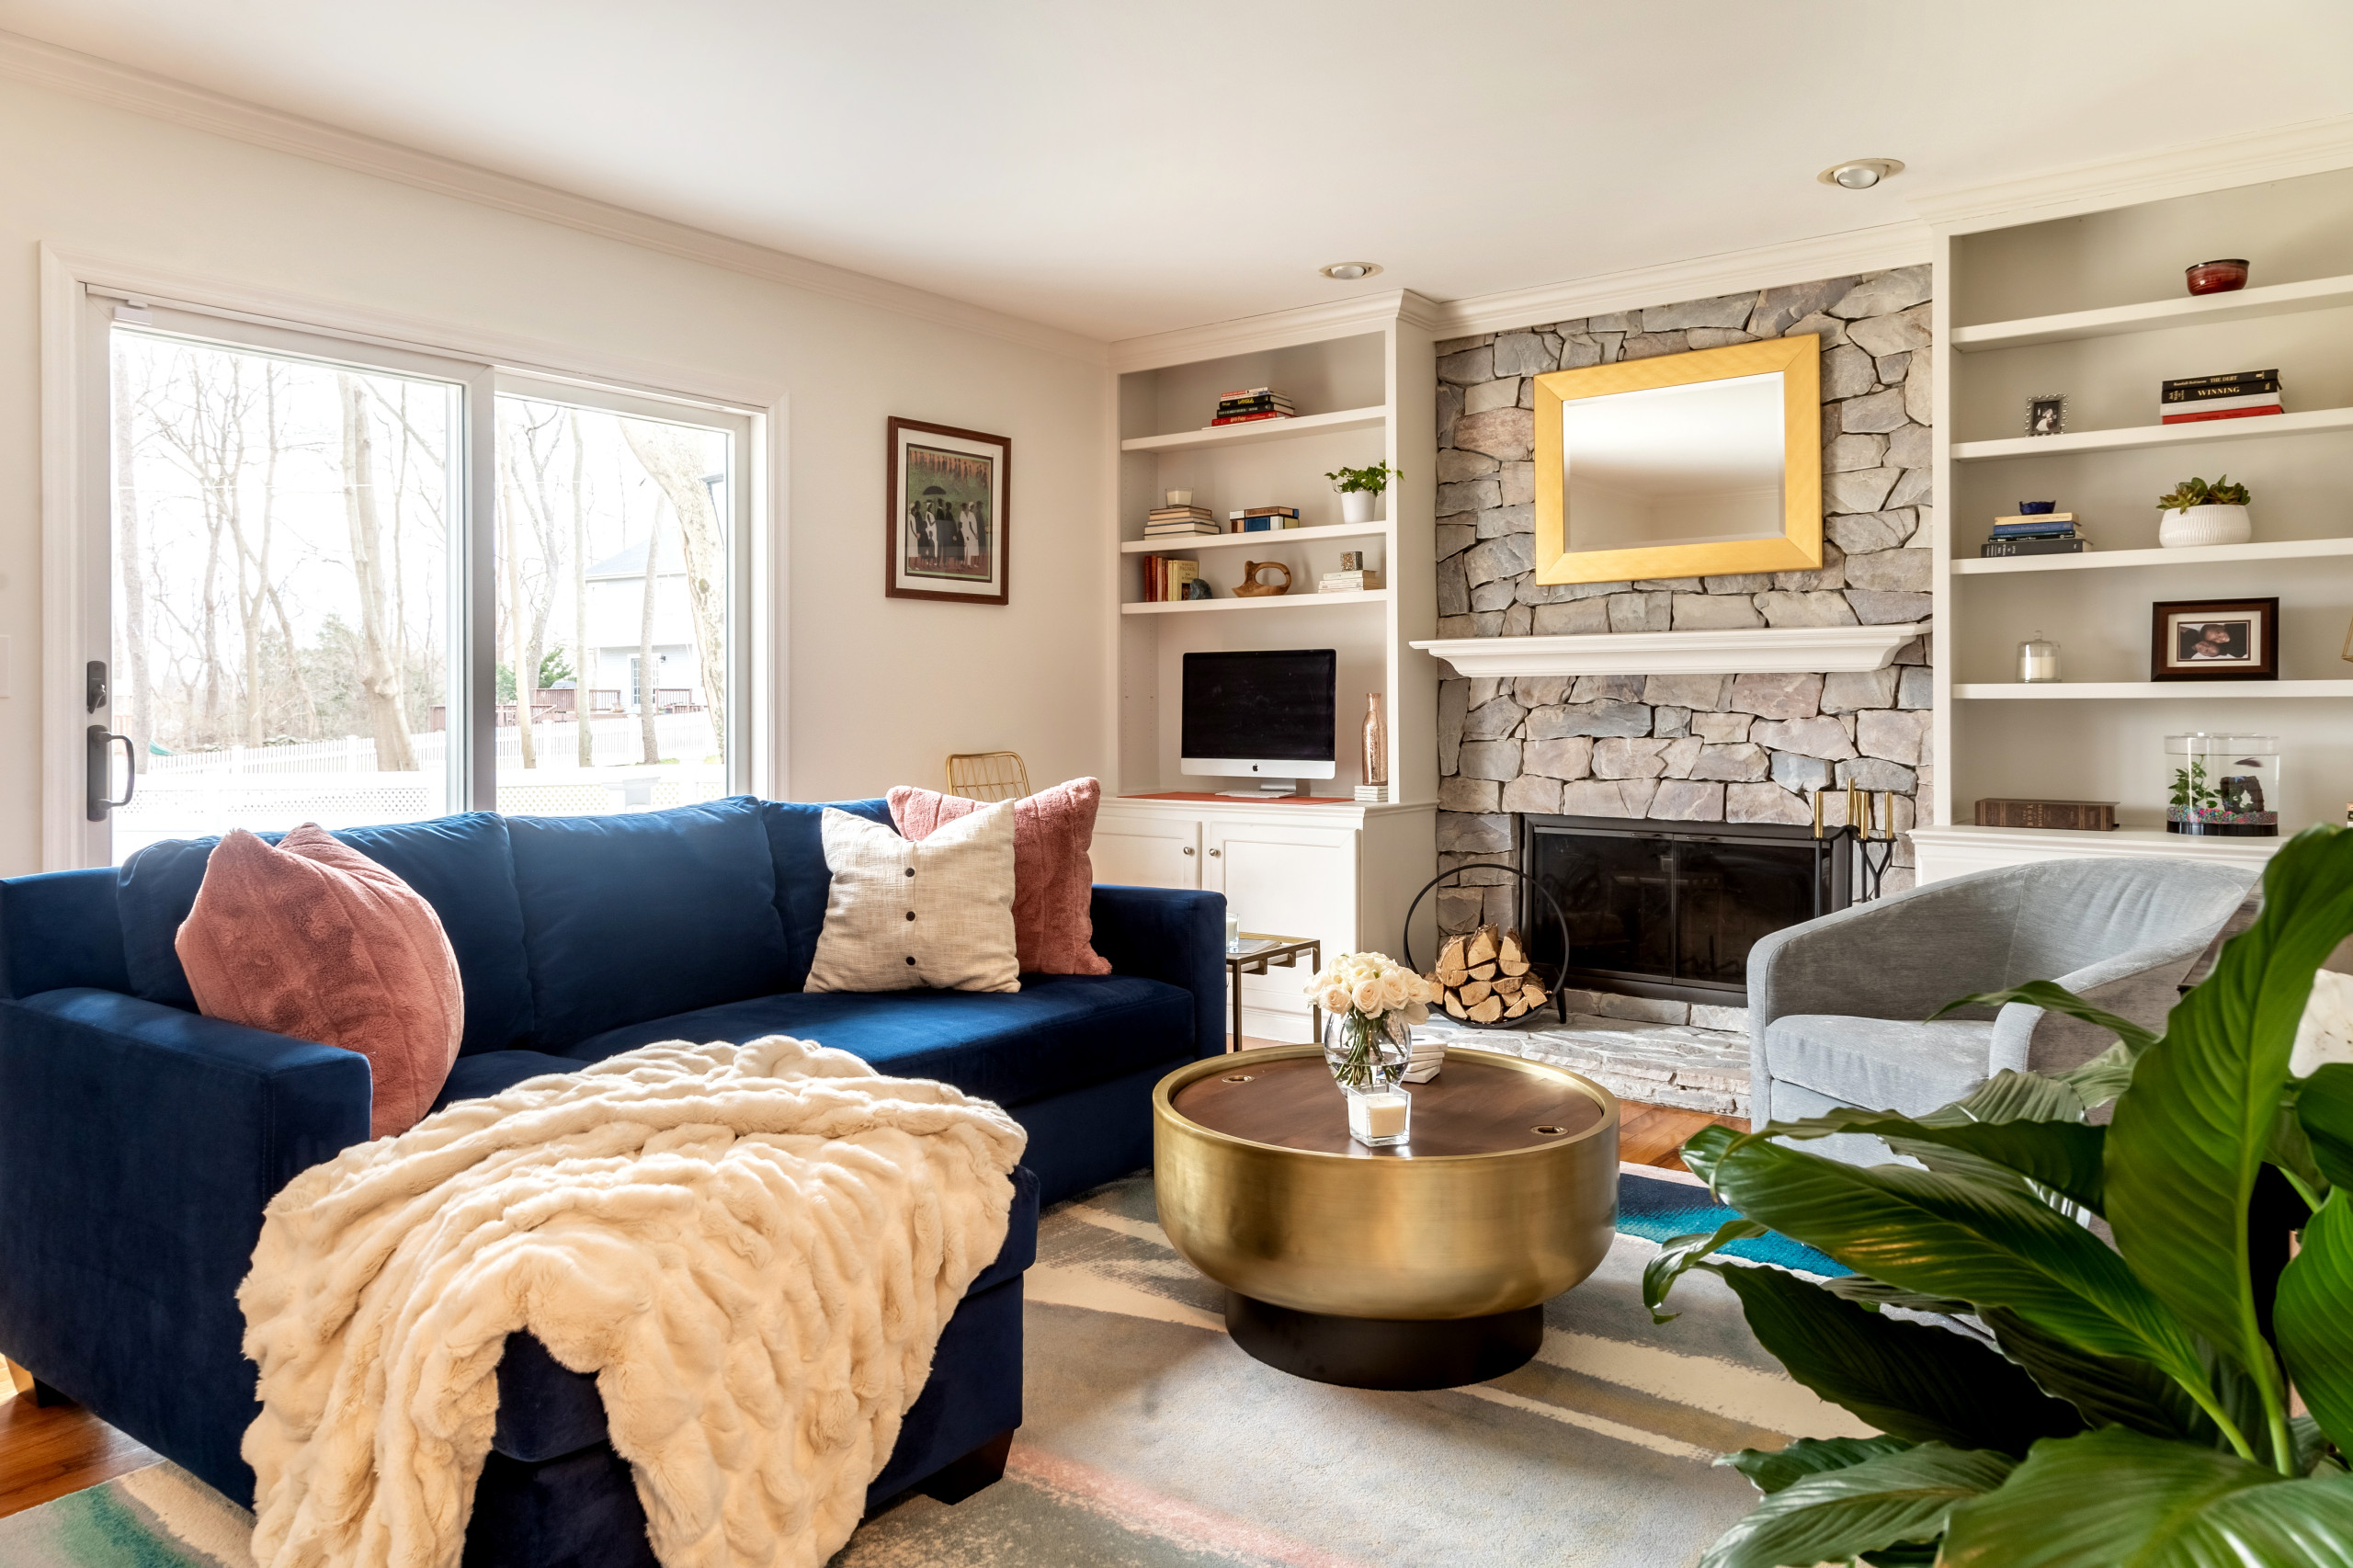 75 Beautiful Family Room With A Stone Fireplace Pictures Ideas April 2021 Houzz